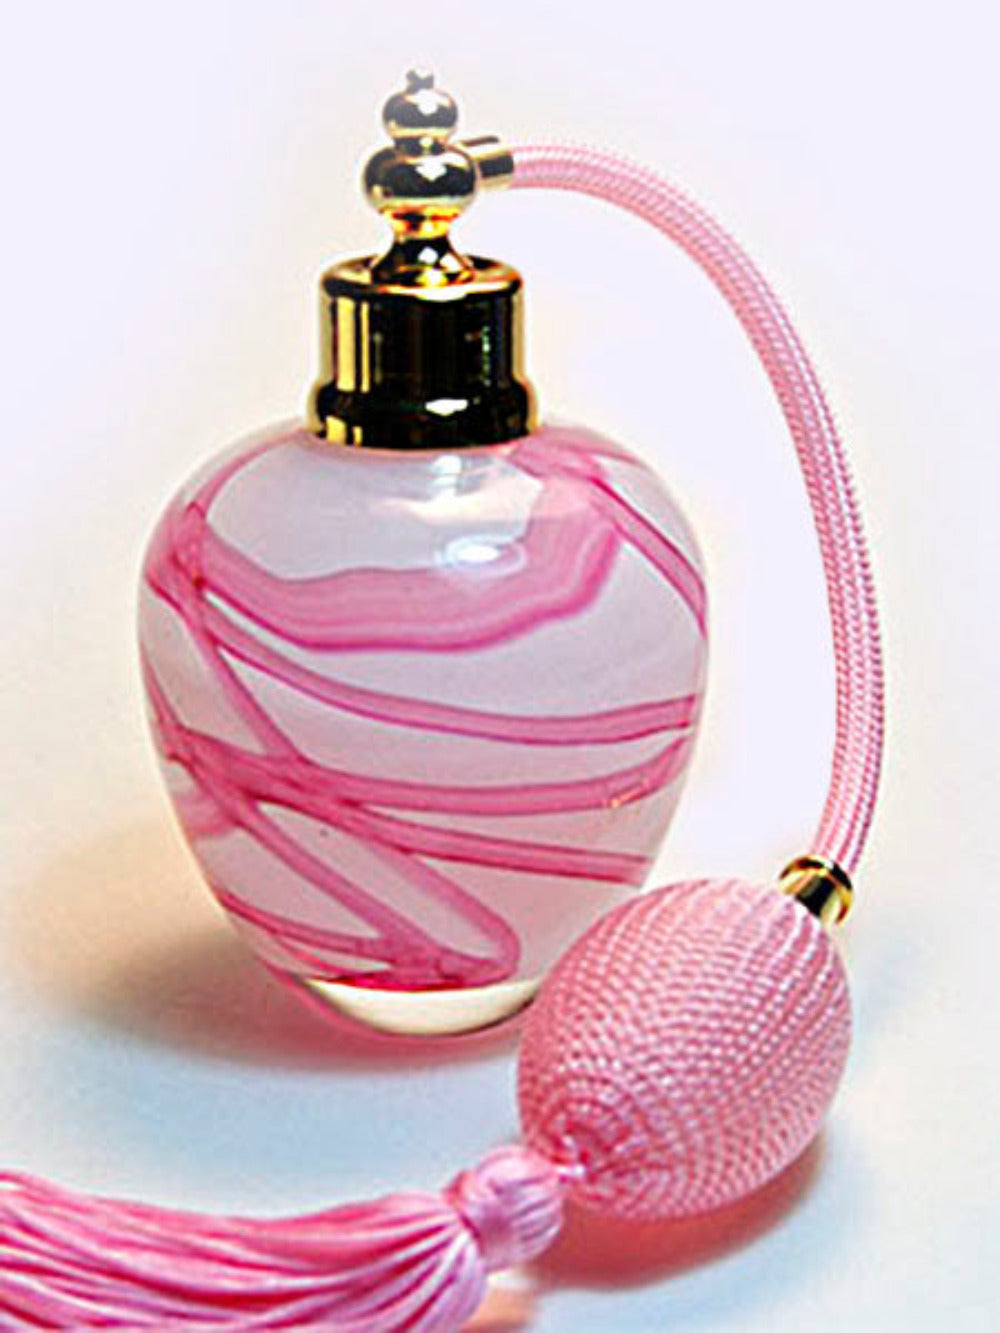 Art crystal glass perfume Bottle with pink bulb atomizer sprayer.